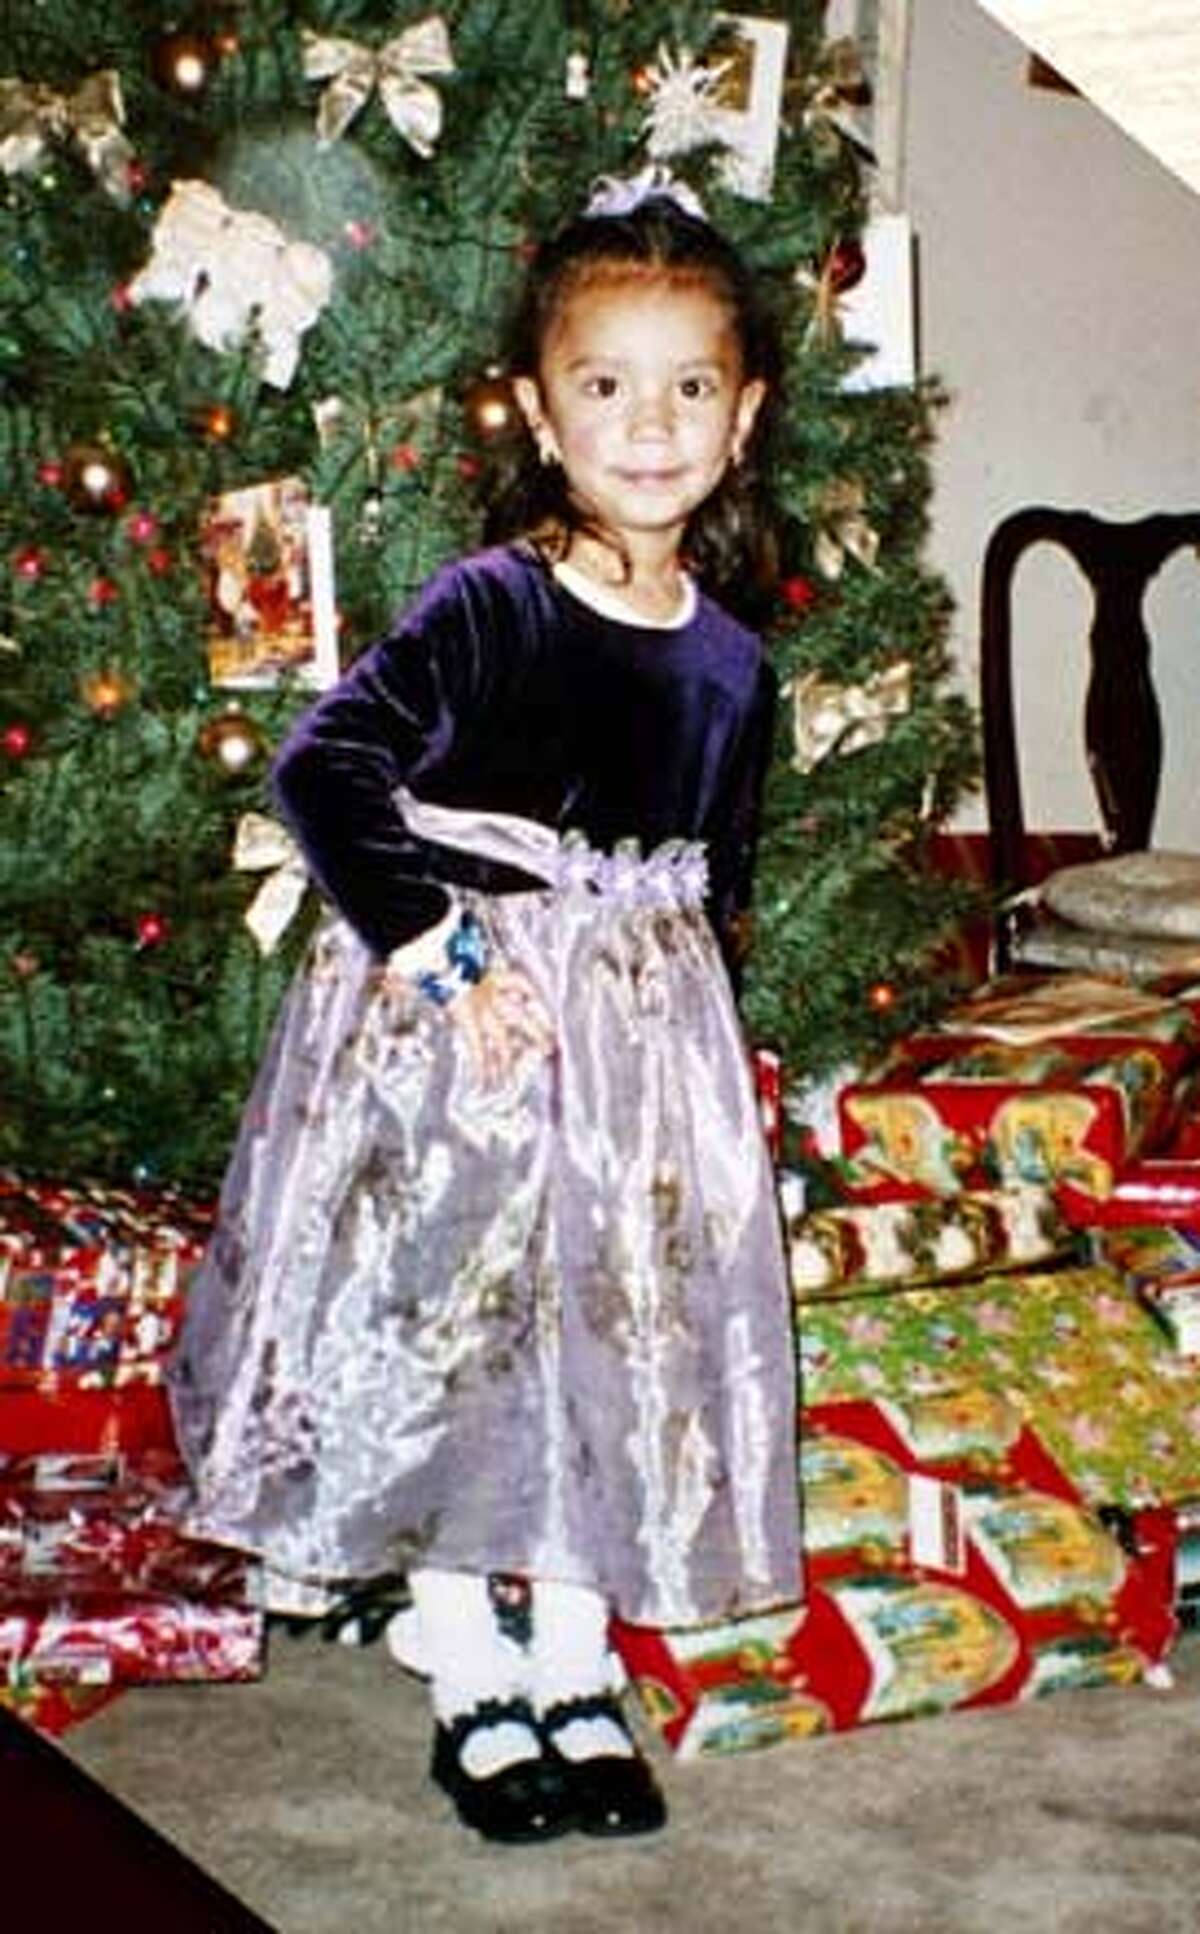 ###Live Caption:Copy photo of Elizabeth Dominguez, Christmas 2002. A memorial was set up at 24th and Portrero for 4 year old Elizabeth Dominguez, killed the day before when a truck spun out of control and pinned her against the side of a restaurant.###Caption History:MEMORIALd-C-12FEB03-MT-MJM Copy photo of Elizabeth Dominguez, Christmas 2002. A memorial was set up at 24th and Portrero for 4 year old Elizabeth Dominguez, killed the day before when a truck spun out of control and pinned her against the side of a restaurant. ALSO Ran on: 09-02-2005 Elizabeth Dominguez was walking with her mother on Feb. 11, 2003, when she was hit by a truck.###Notes:###Special Instructions:CAT